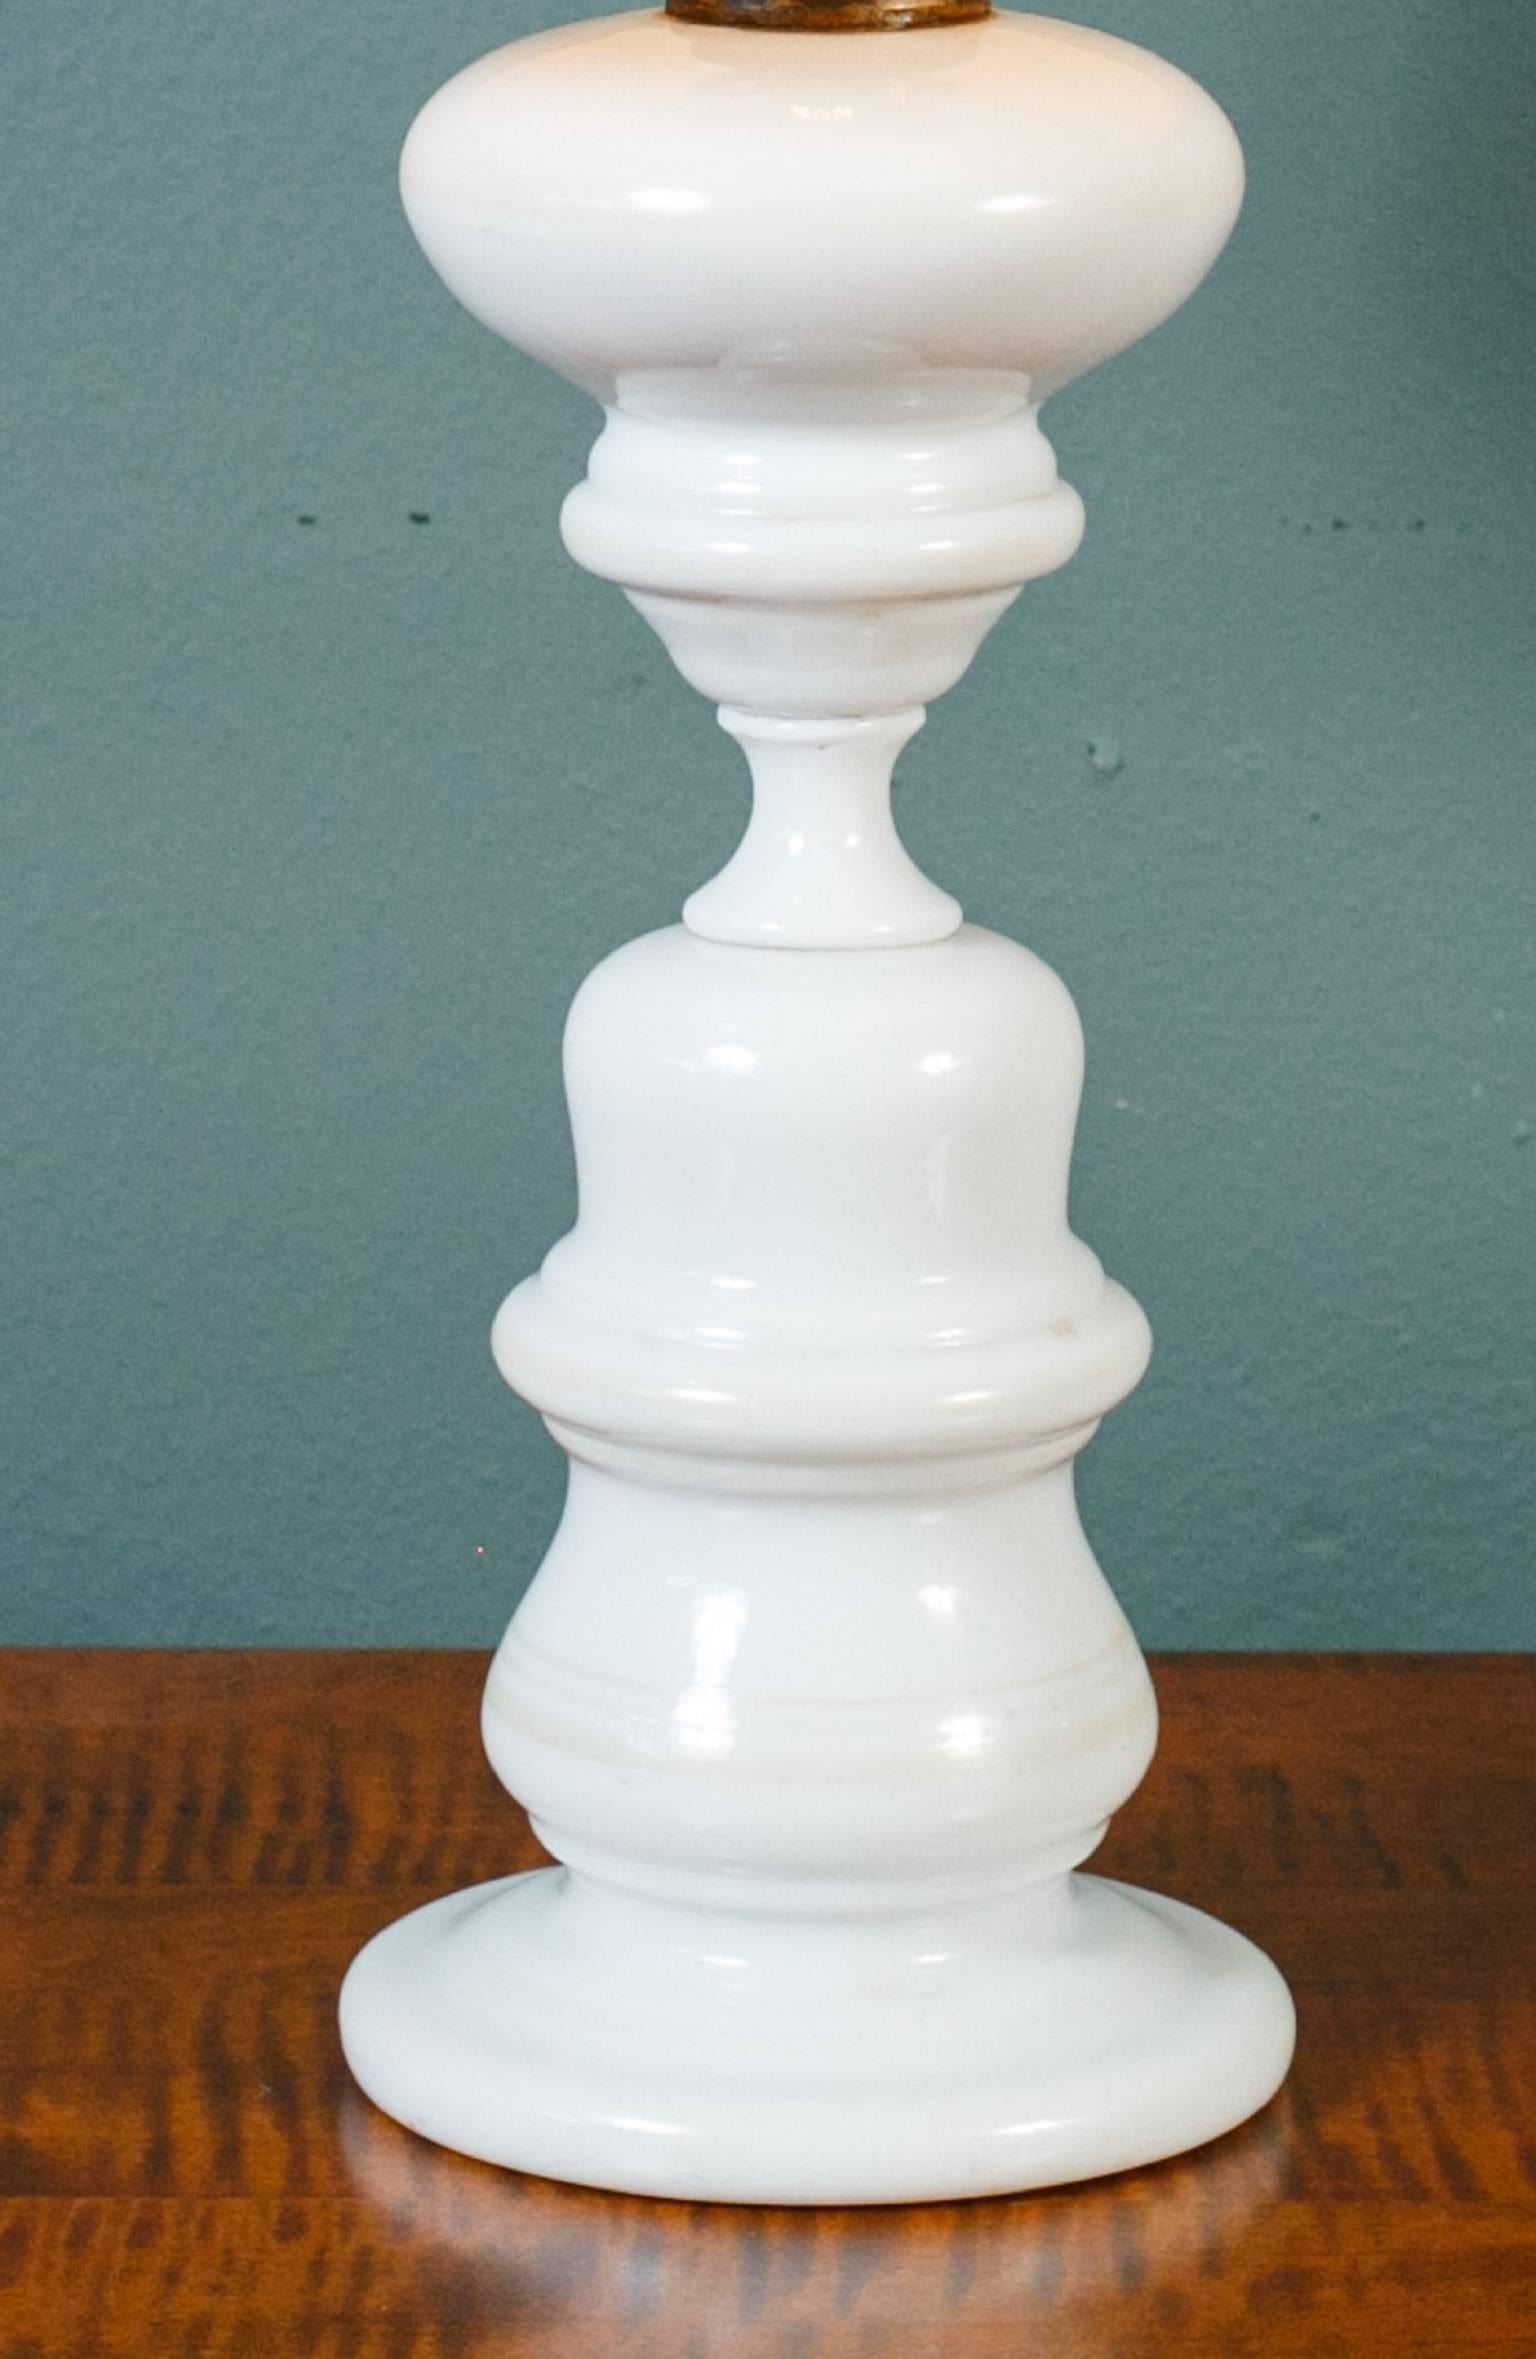 Vintage milk glass table lamp with off-white shade. Subtle ivory stripes painted on the banding of the body. Newly rewired with all UL listed parts and braided ivory fabric cord. Measurement listed is with shade on. Lamp itself measures 6.25 inches